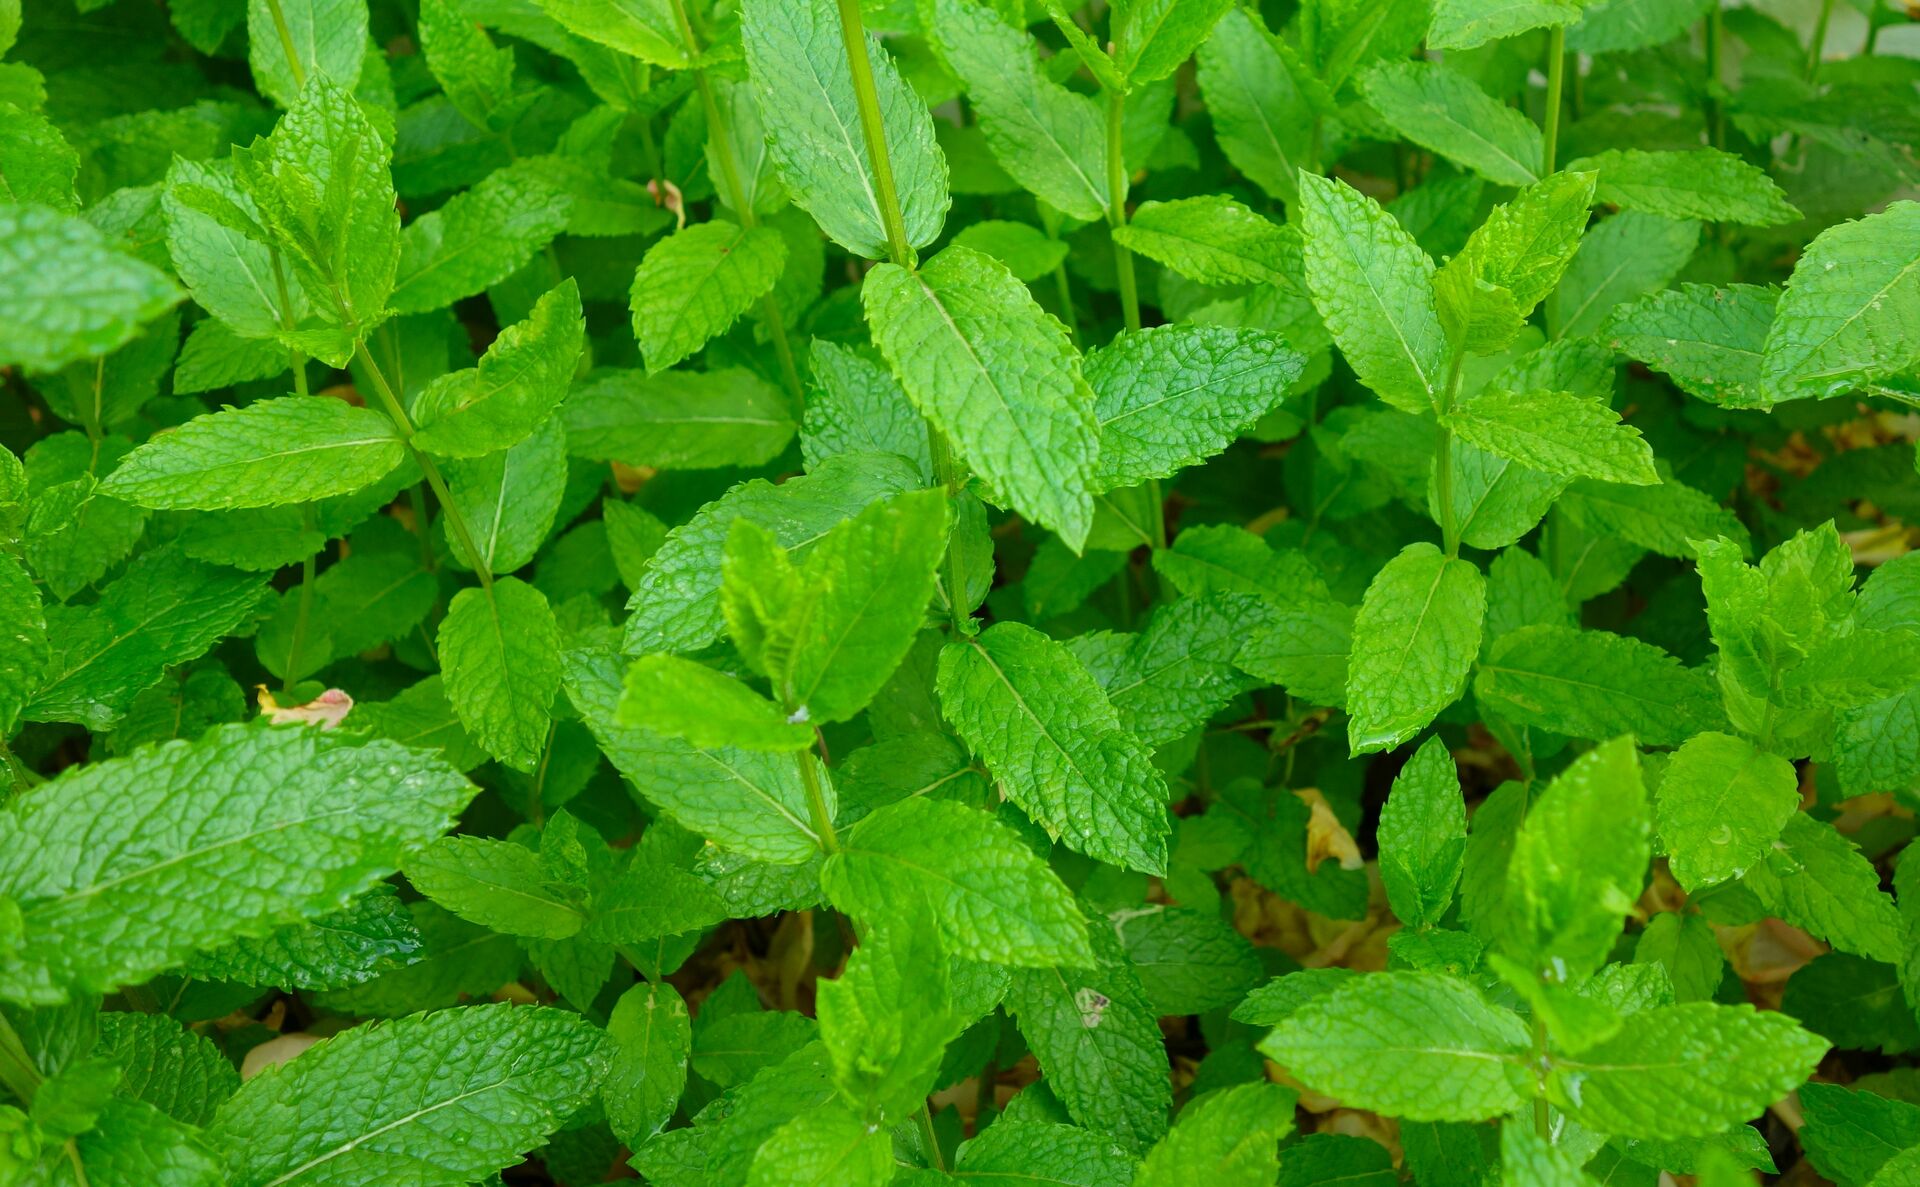 The free high-resolution photo of mint, peppermint, plant, leaves, herbal, aroma, nature, green, spearmint, herbal plant, fragrant cabbage, flavor, healthy, cooking, flowering plant, flower, leaf, herb, groundcover, apple mint, Stevia rebaudiana, nettle family, perennial plant